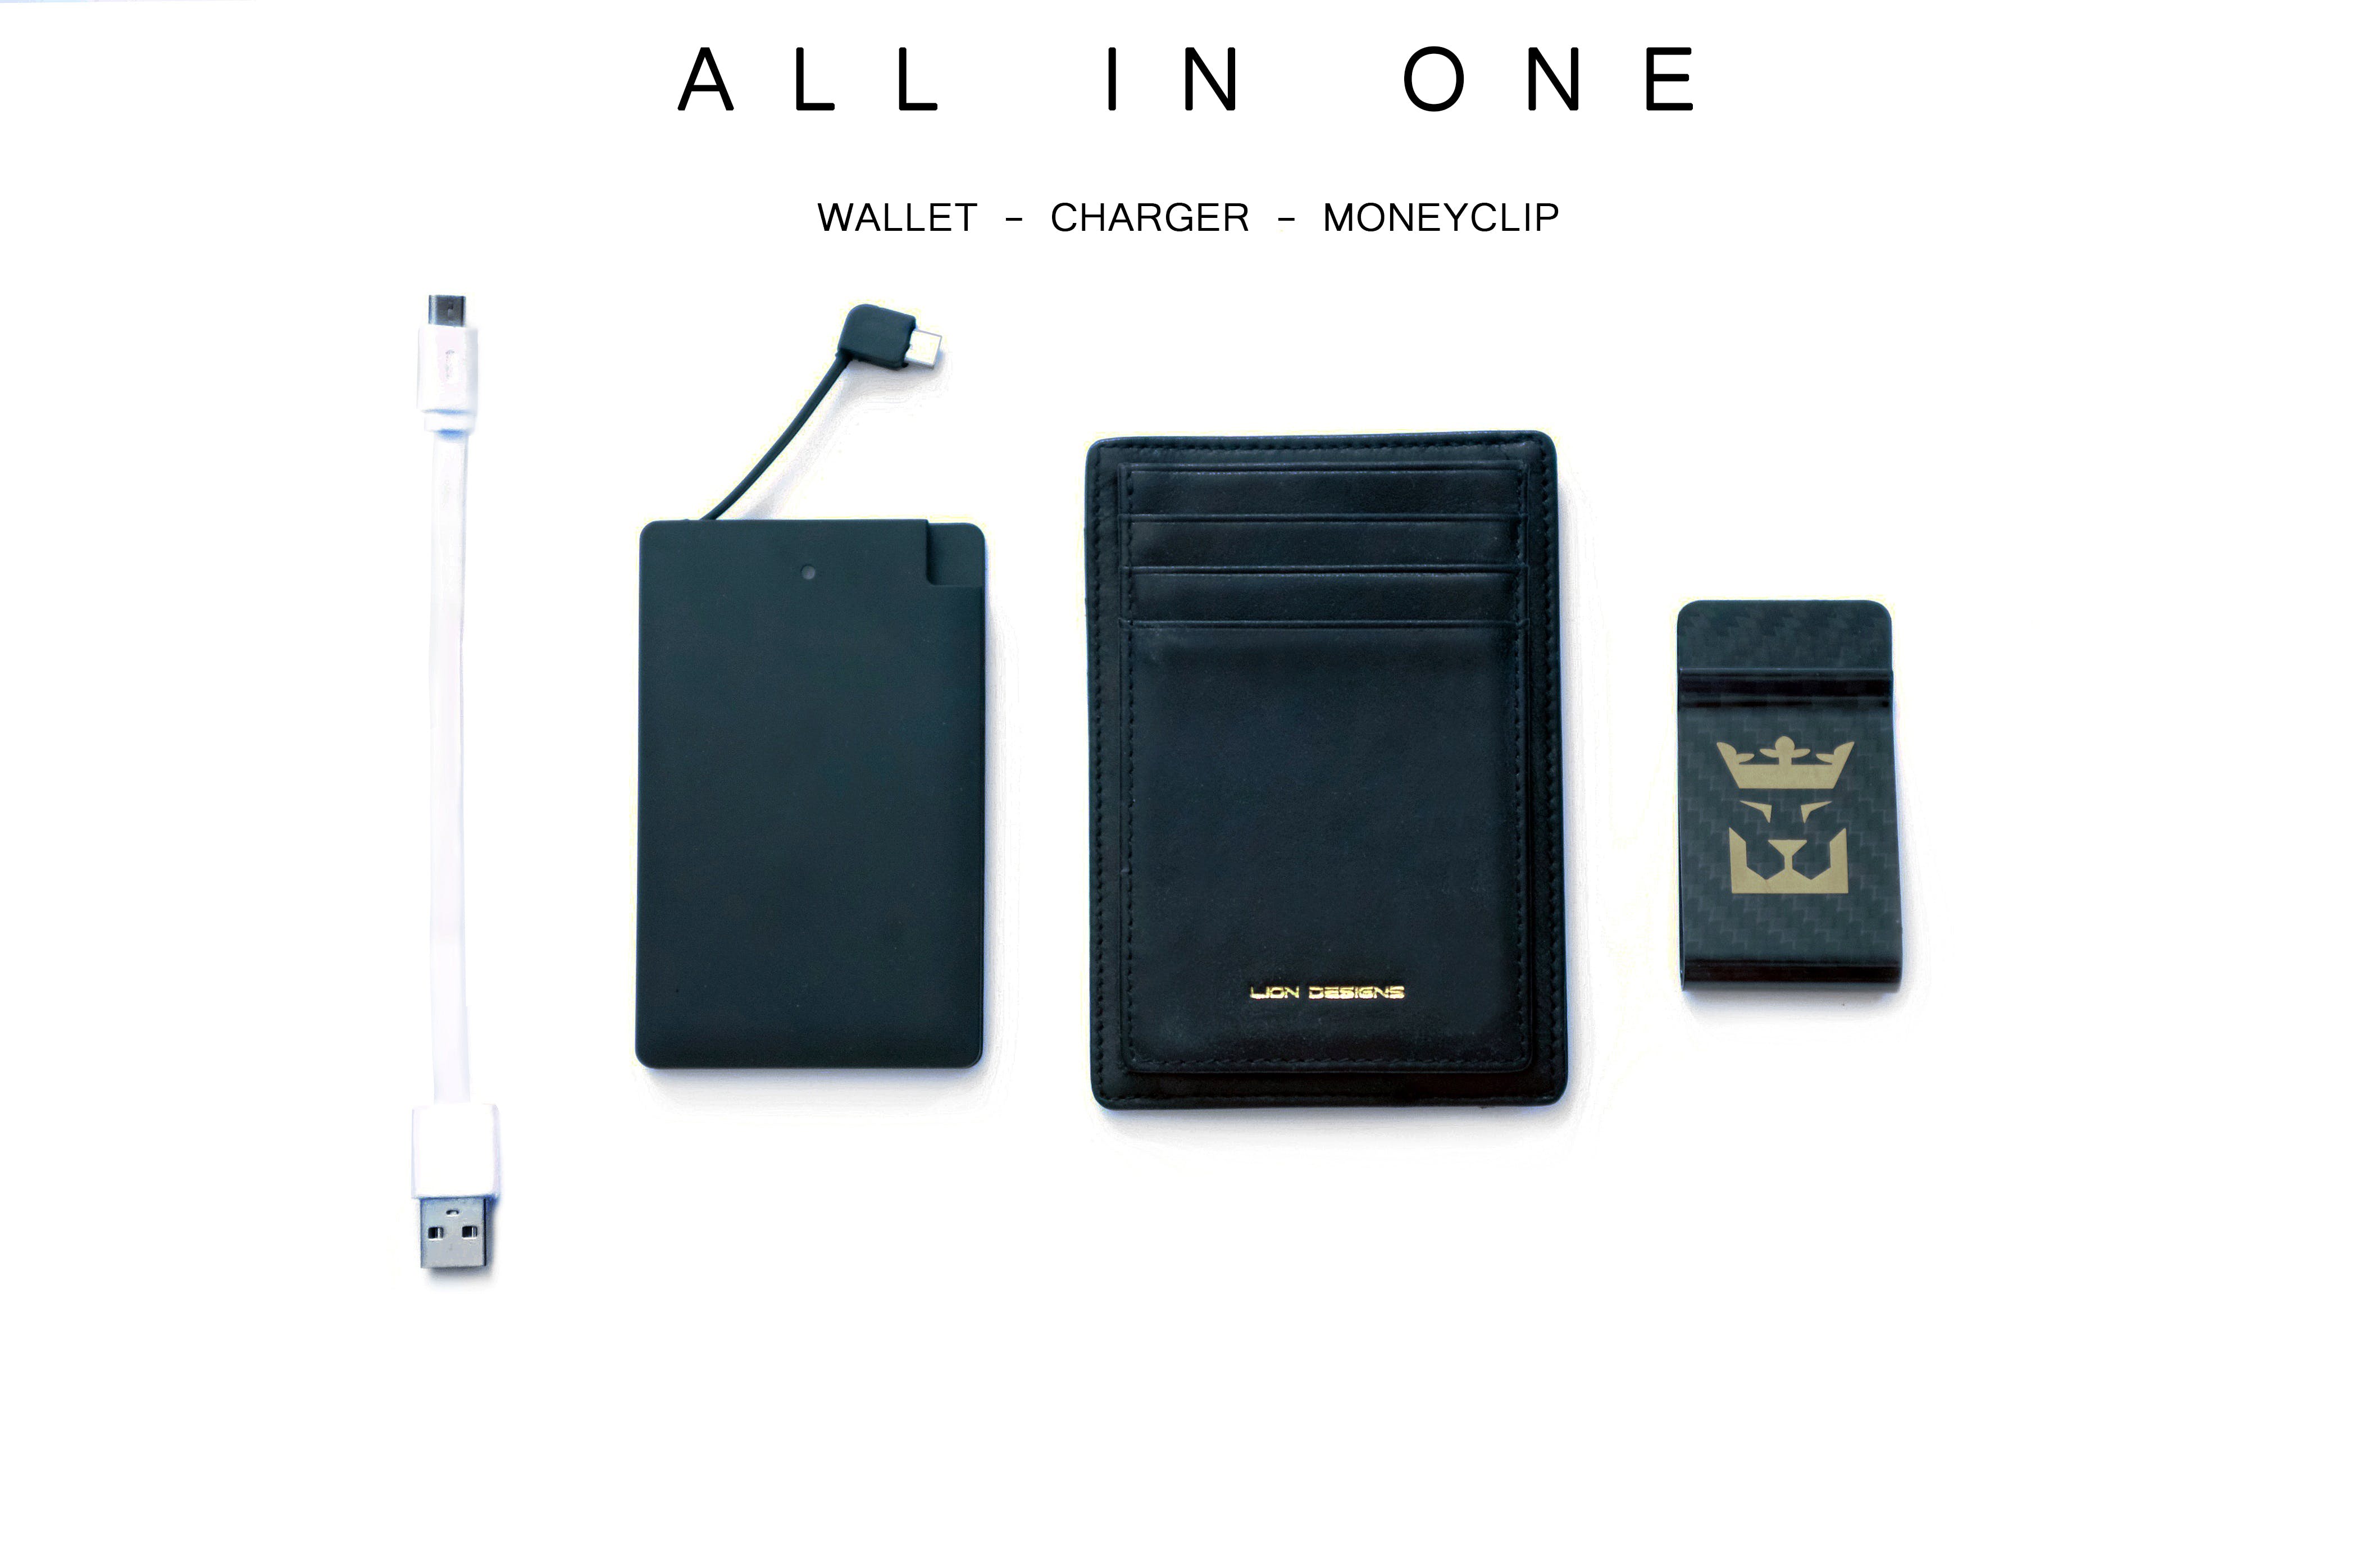 Luxury Wallet with Money Clip & Portable Charger media 1